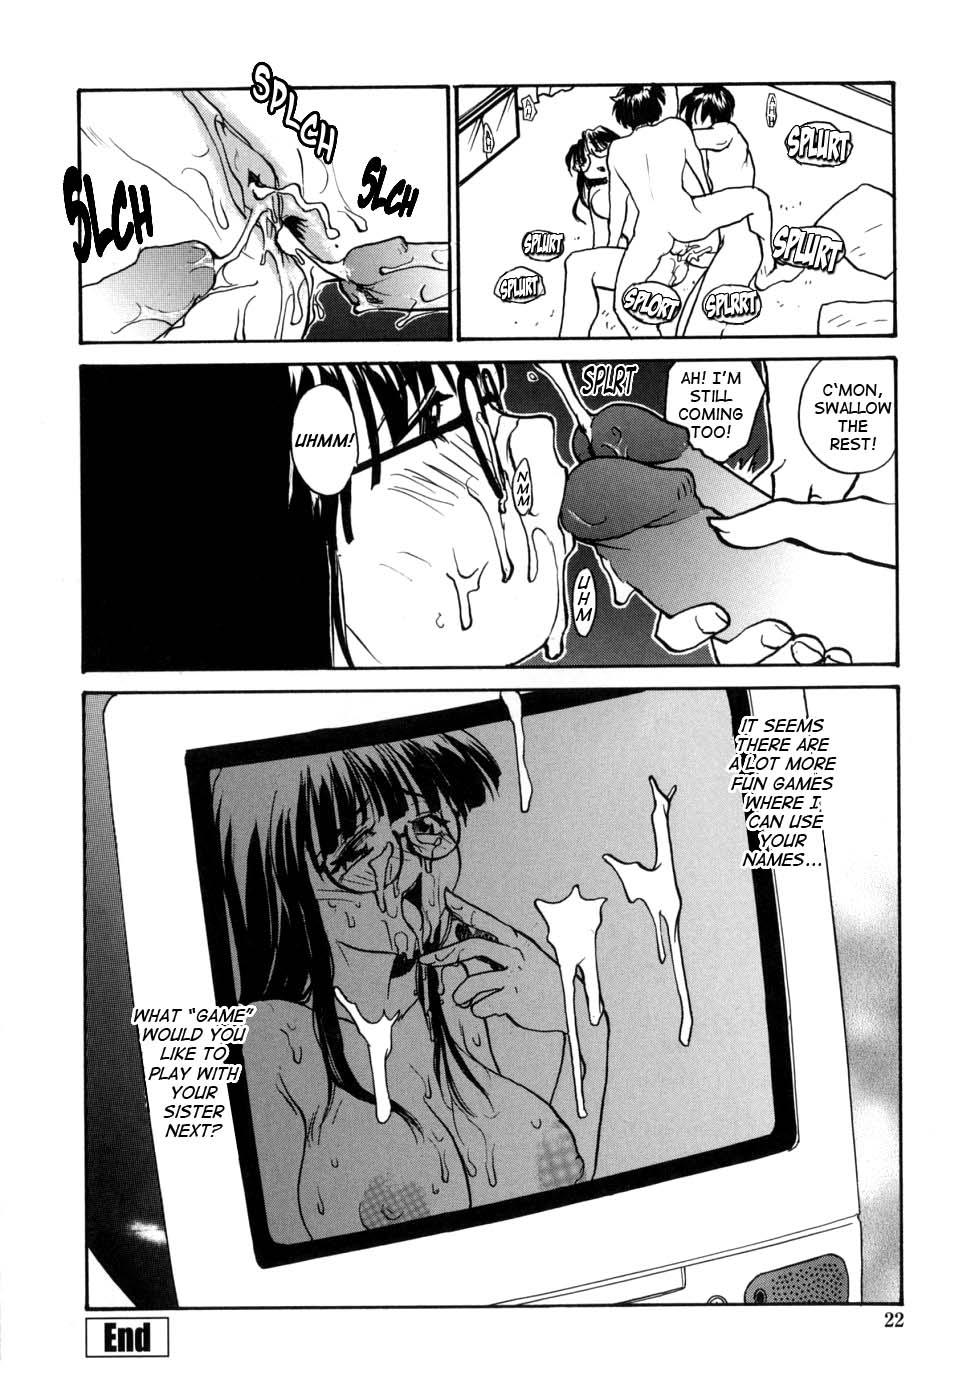 Ane to Megane to Milk - Sister, glasses and sperm. 21